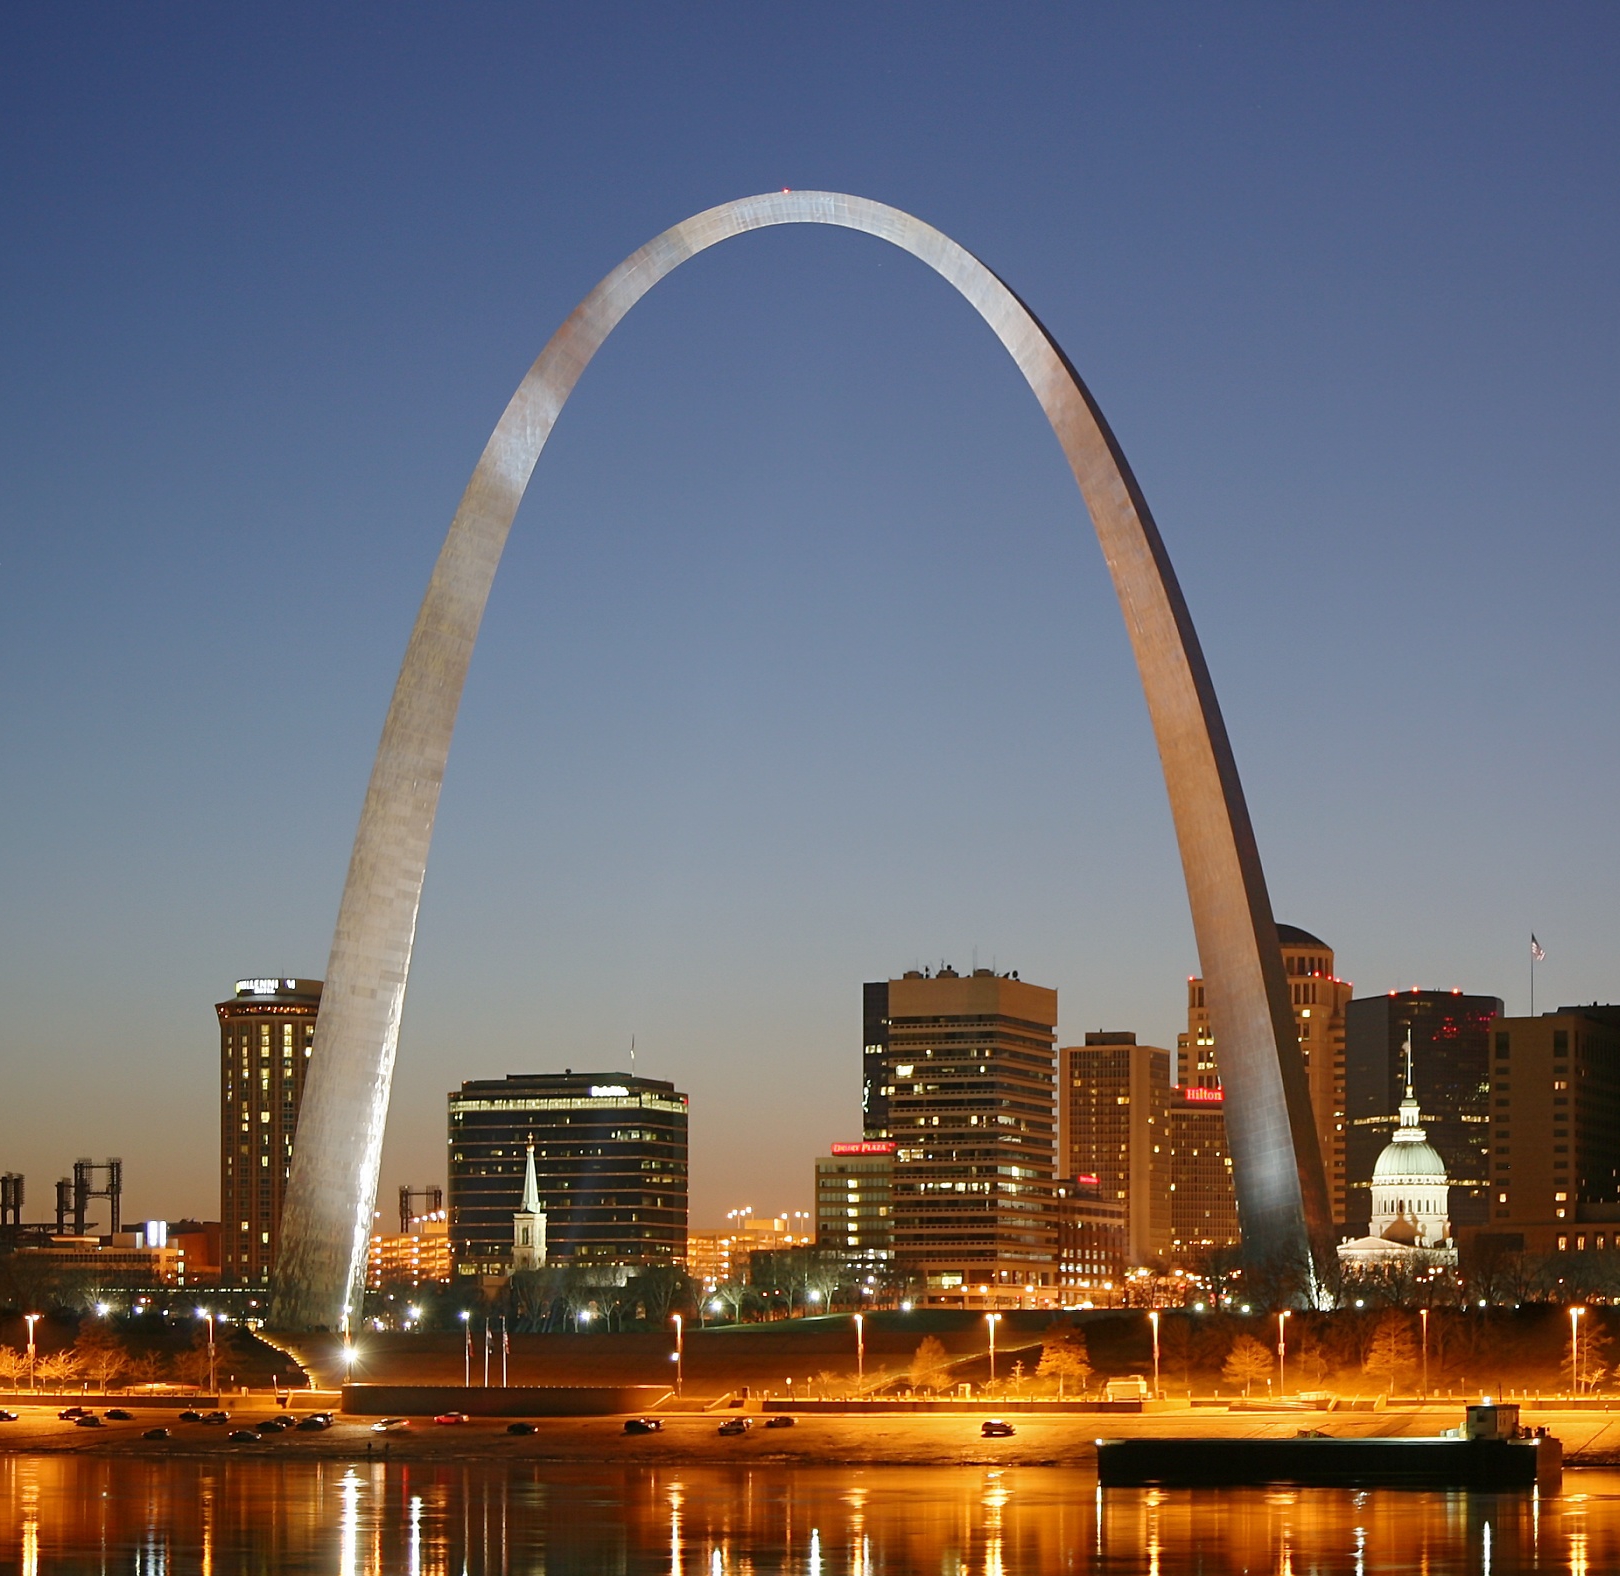 St. Louis to celebrate 50th anniversary of Gateway Arch in October